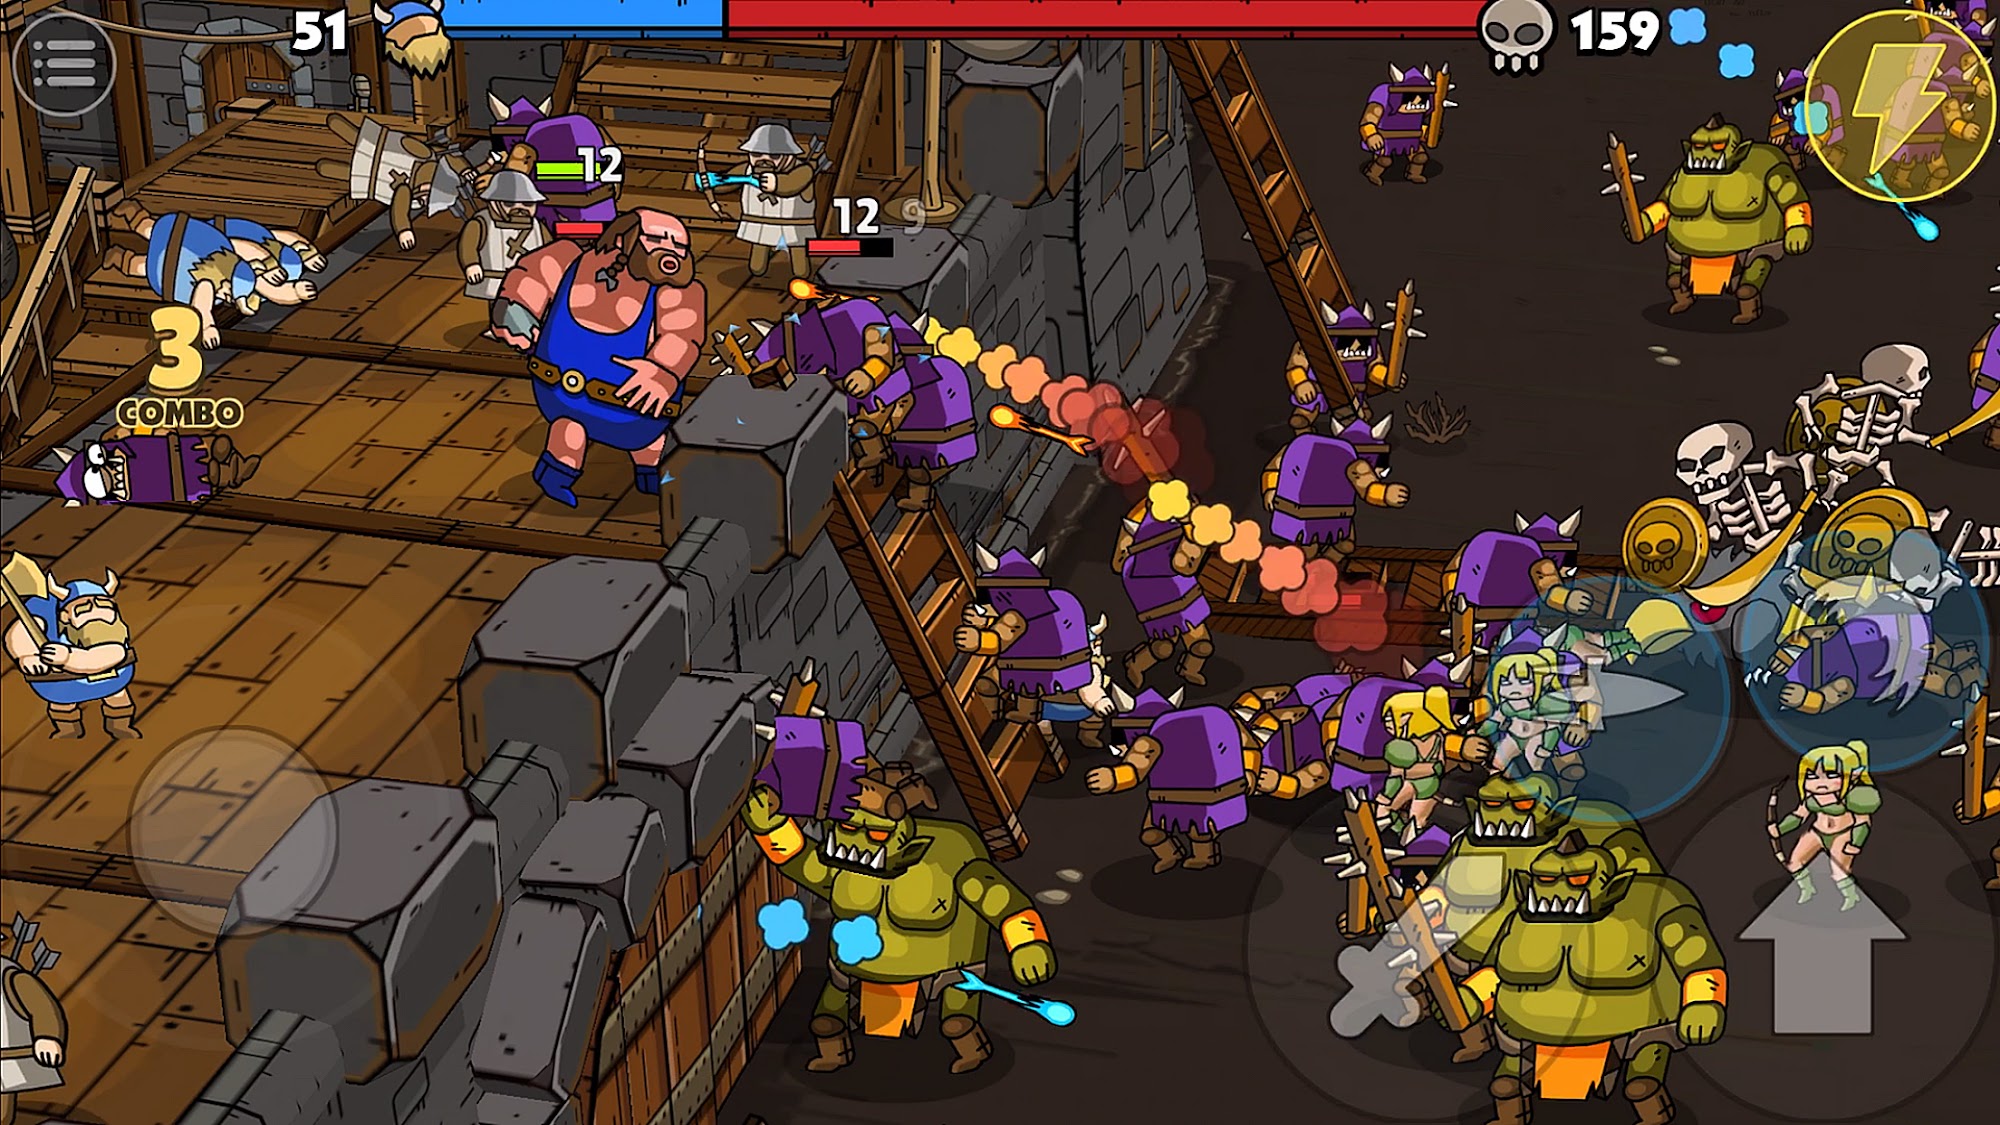 Gameplay of the Maximus 2: Fantasy Beat-Em-Up for Android phone or tablet.